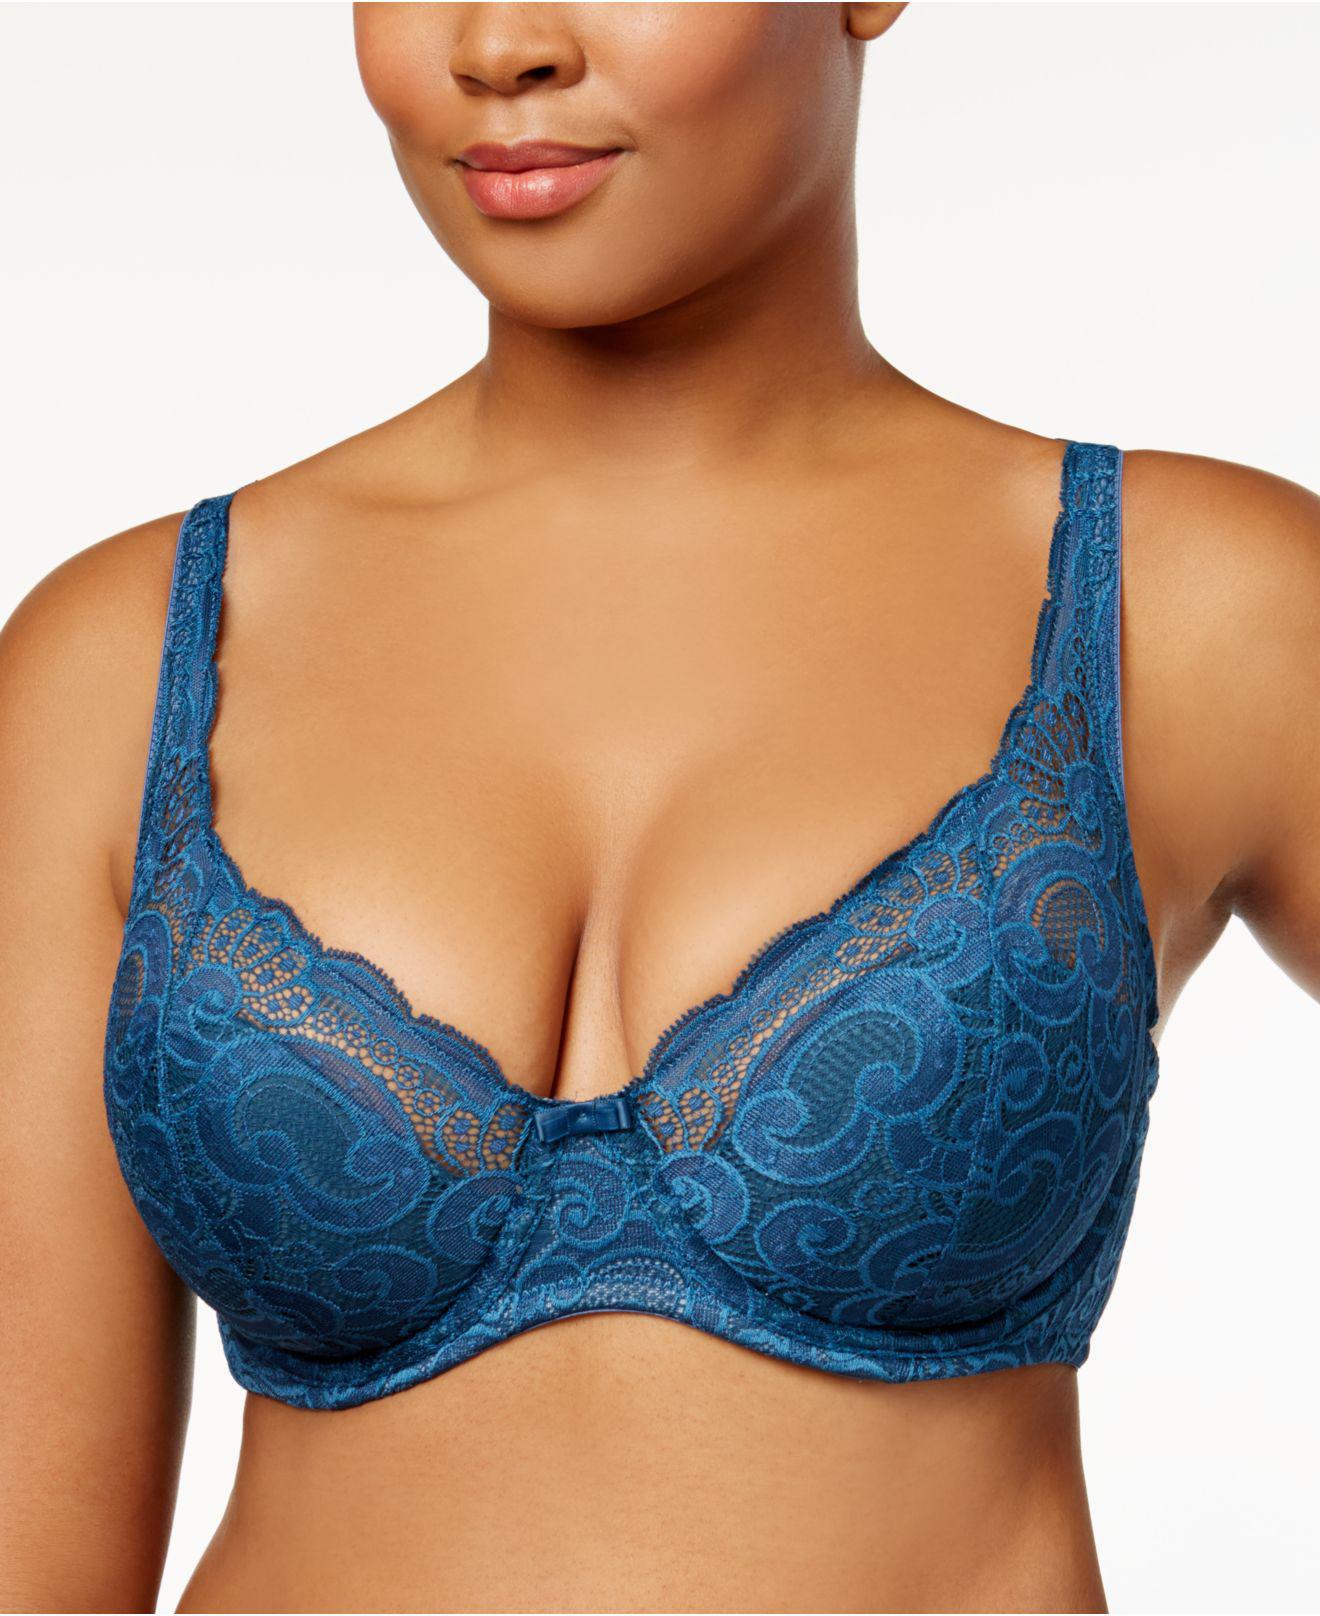 Playtex Love My Curves Lace Bra 4514 in Blue